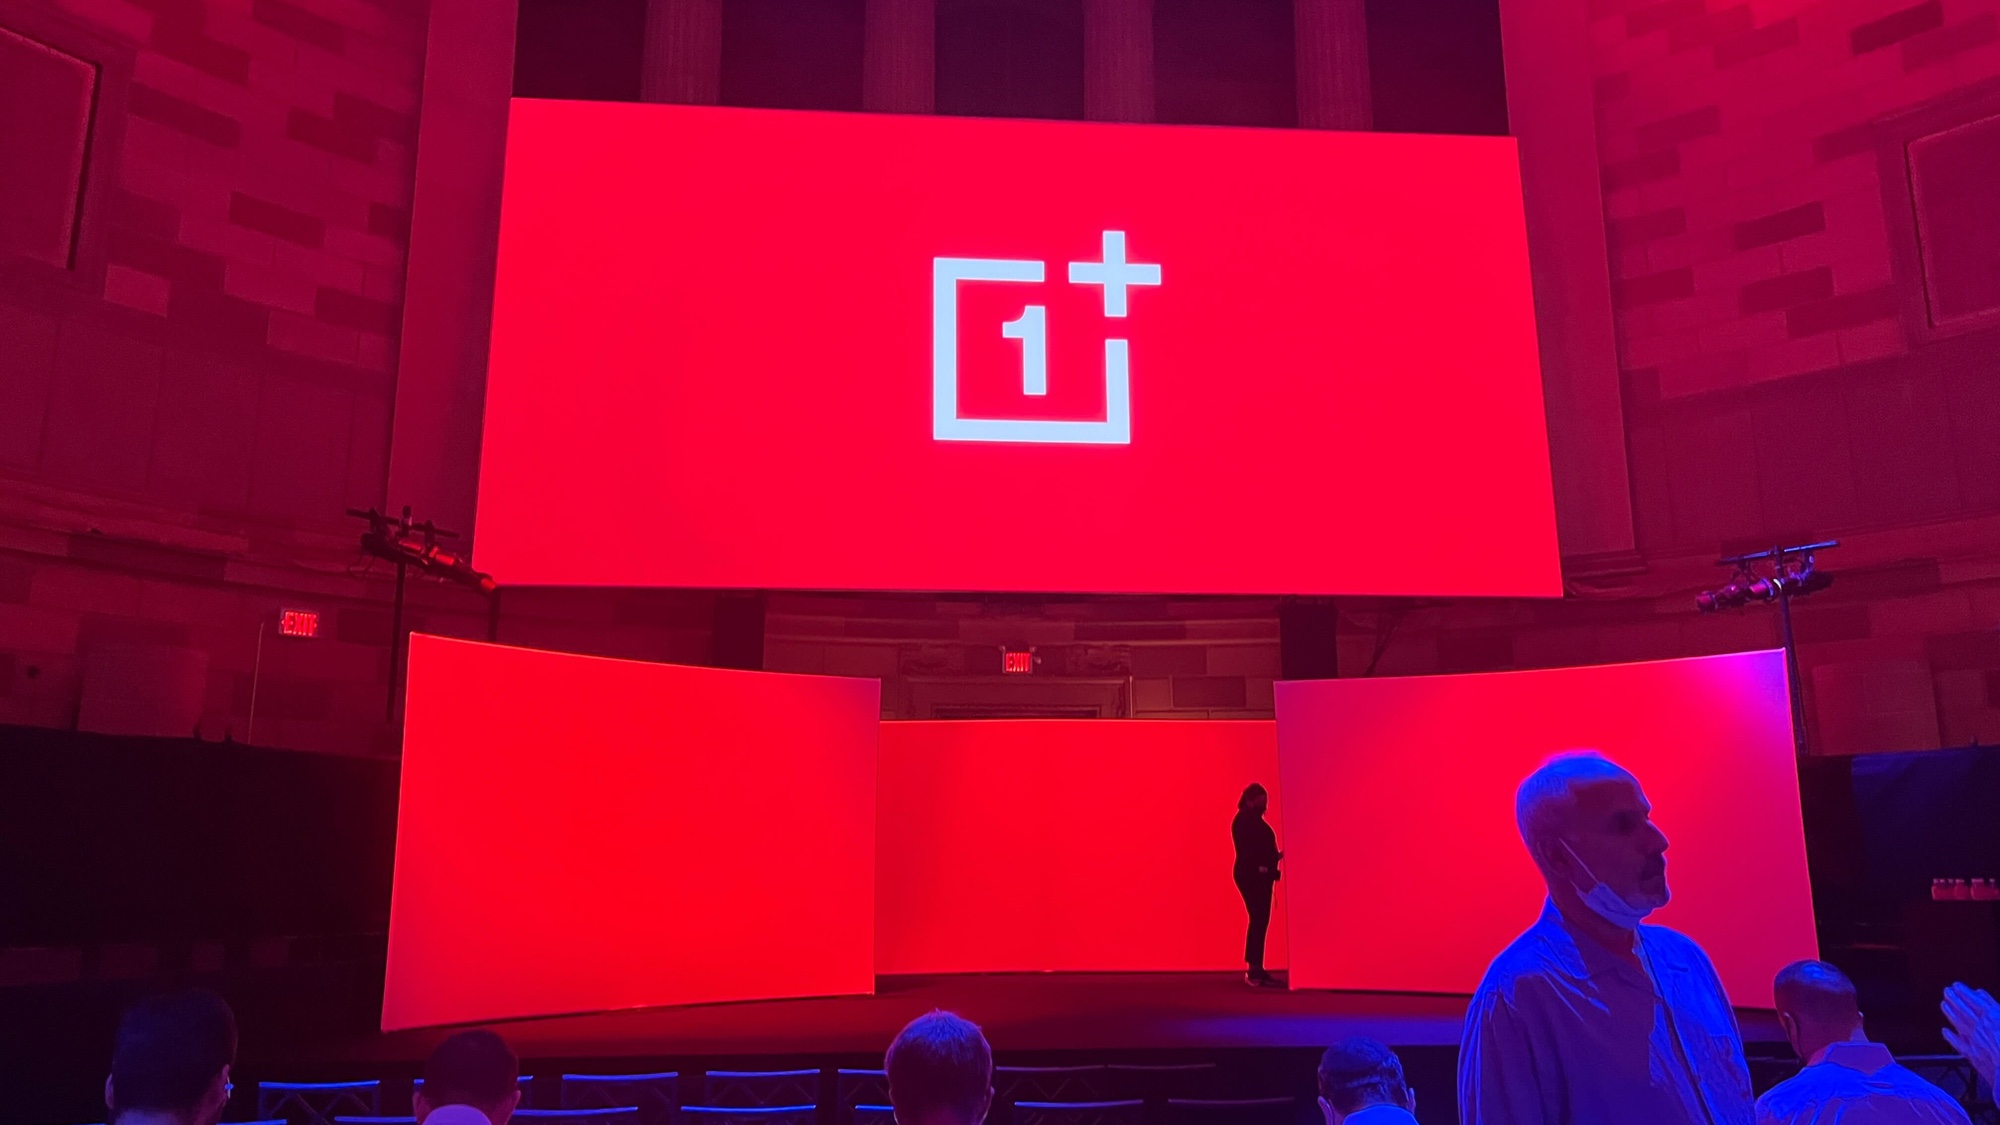 OnePlus 10T launch at Gotham Hall in New York